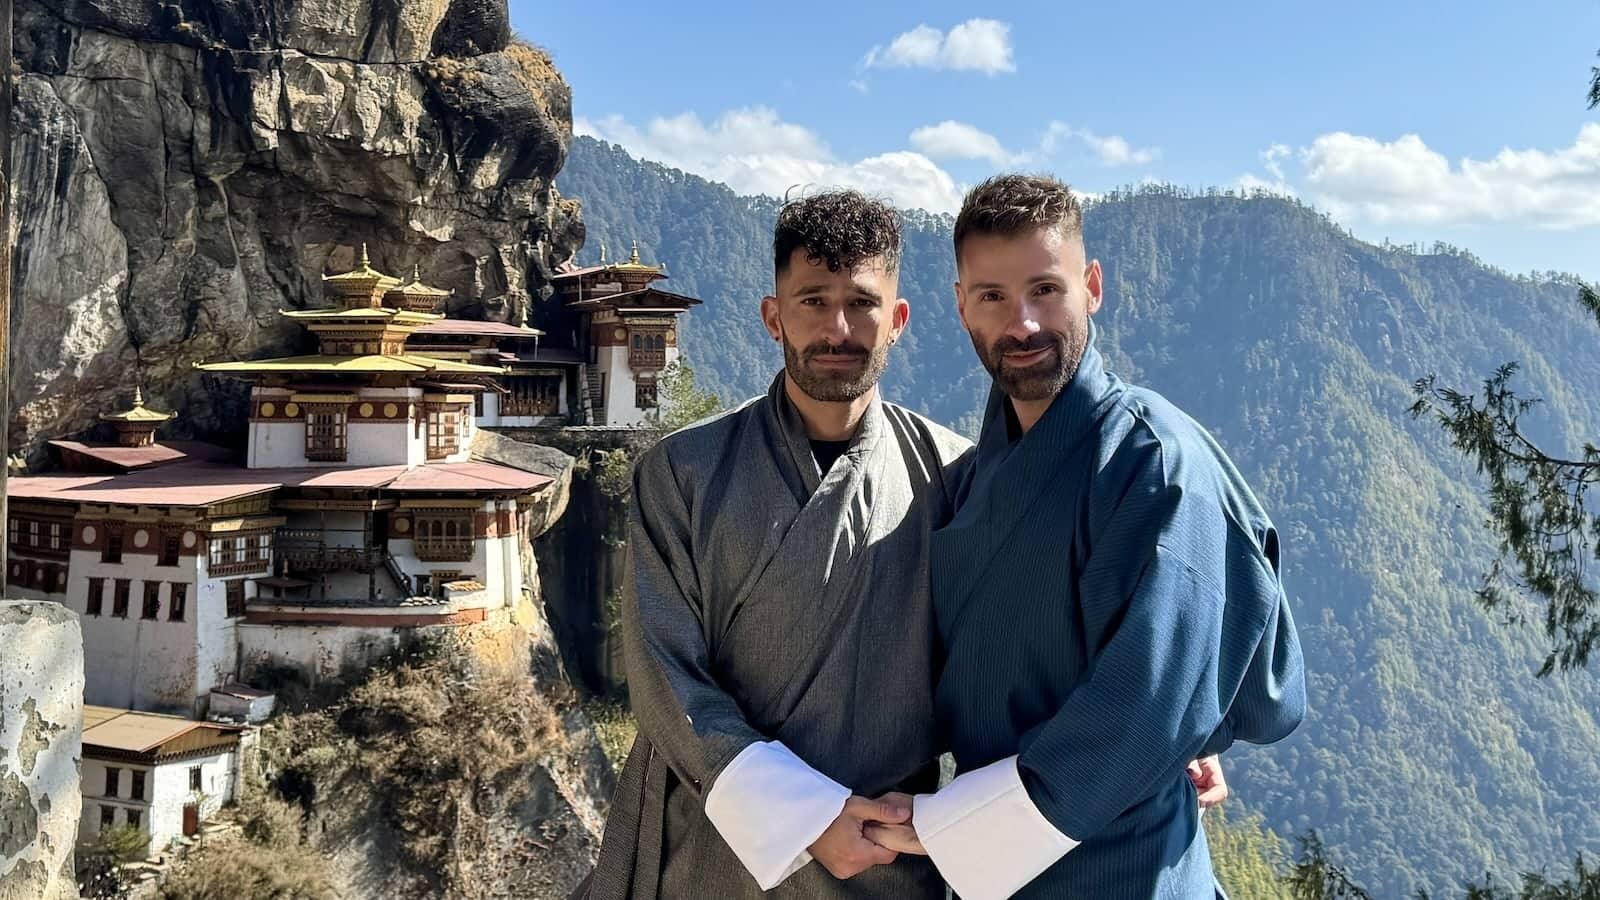 Gay couple holding hands at TIger's Nest Monastery in Bhutan.